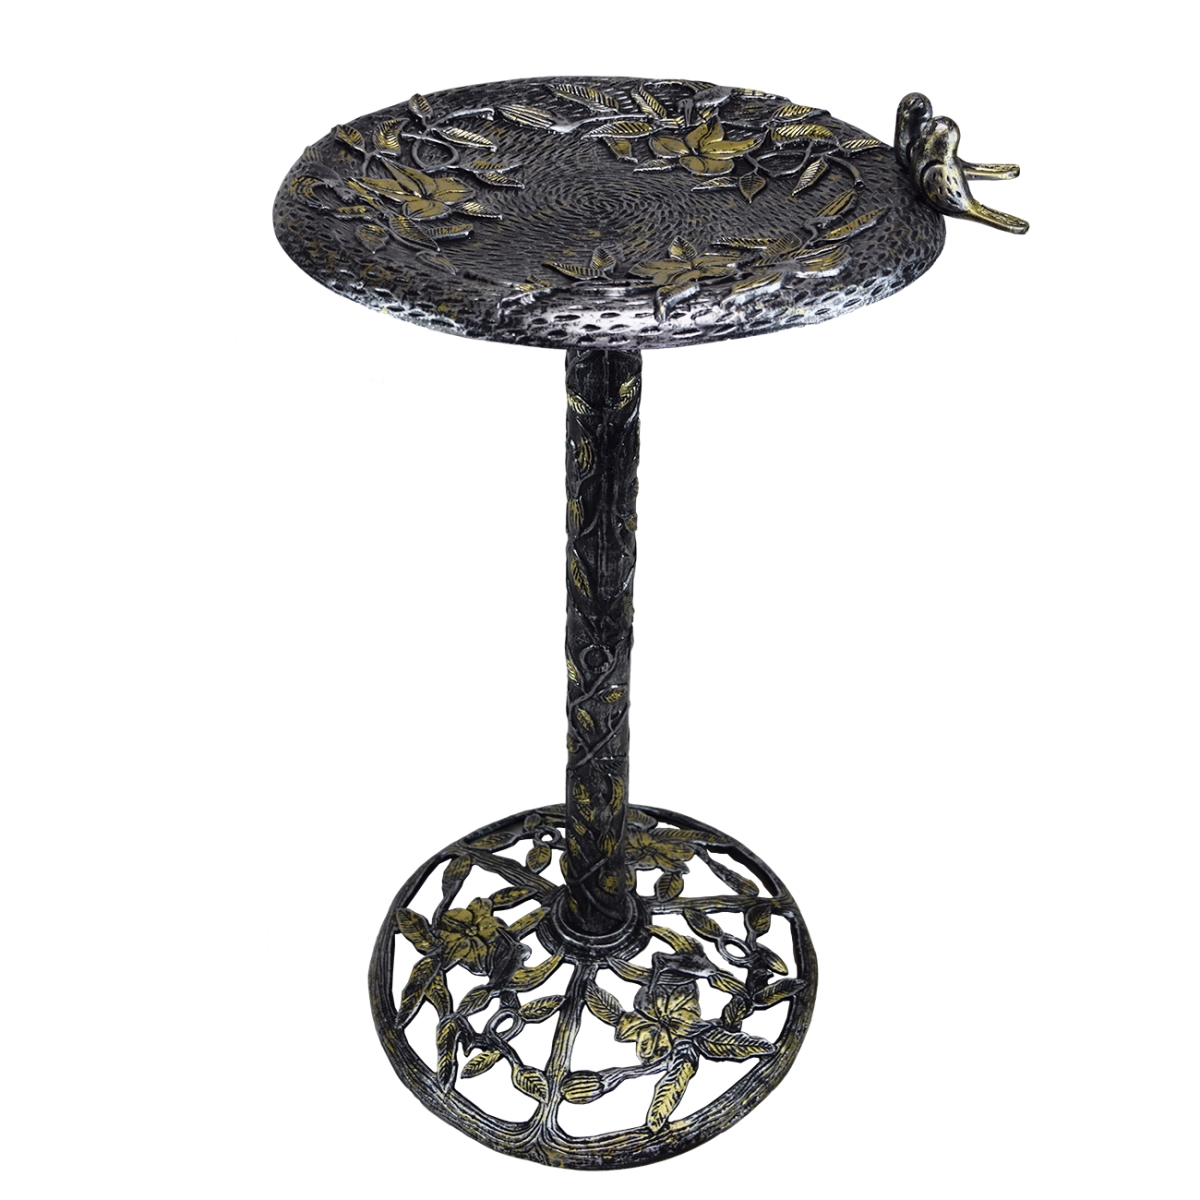 Oakland Living 34 In. Handmade Solid Heavy Tall Black & Gold Cast Aluminum High Quality Metal Bird Bath With Twin Singing Birds, Antique Silver